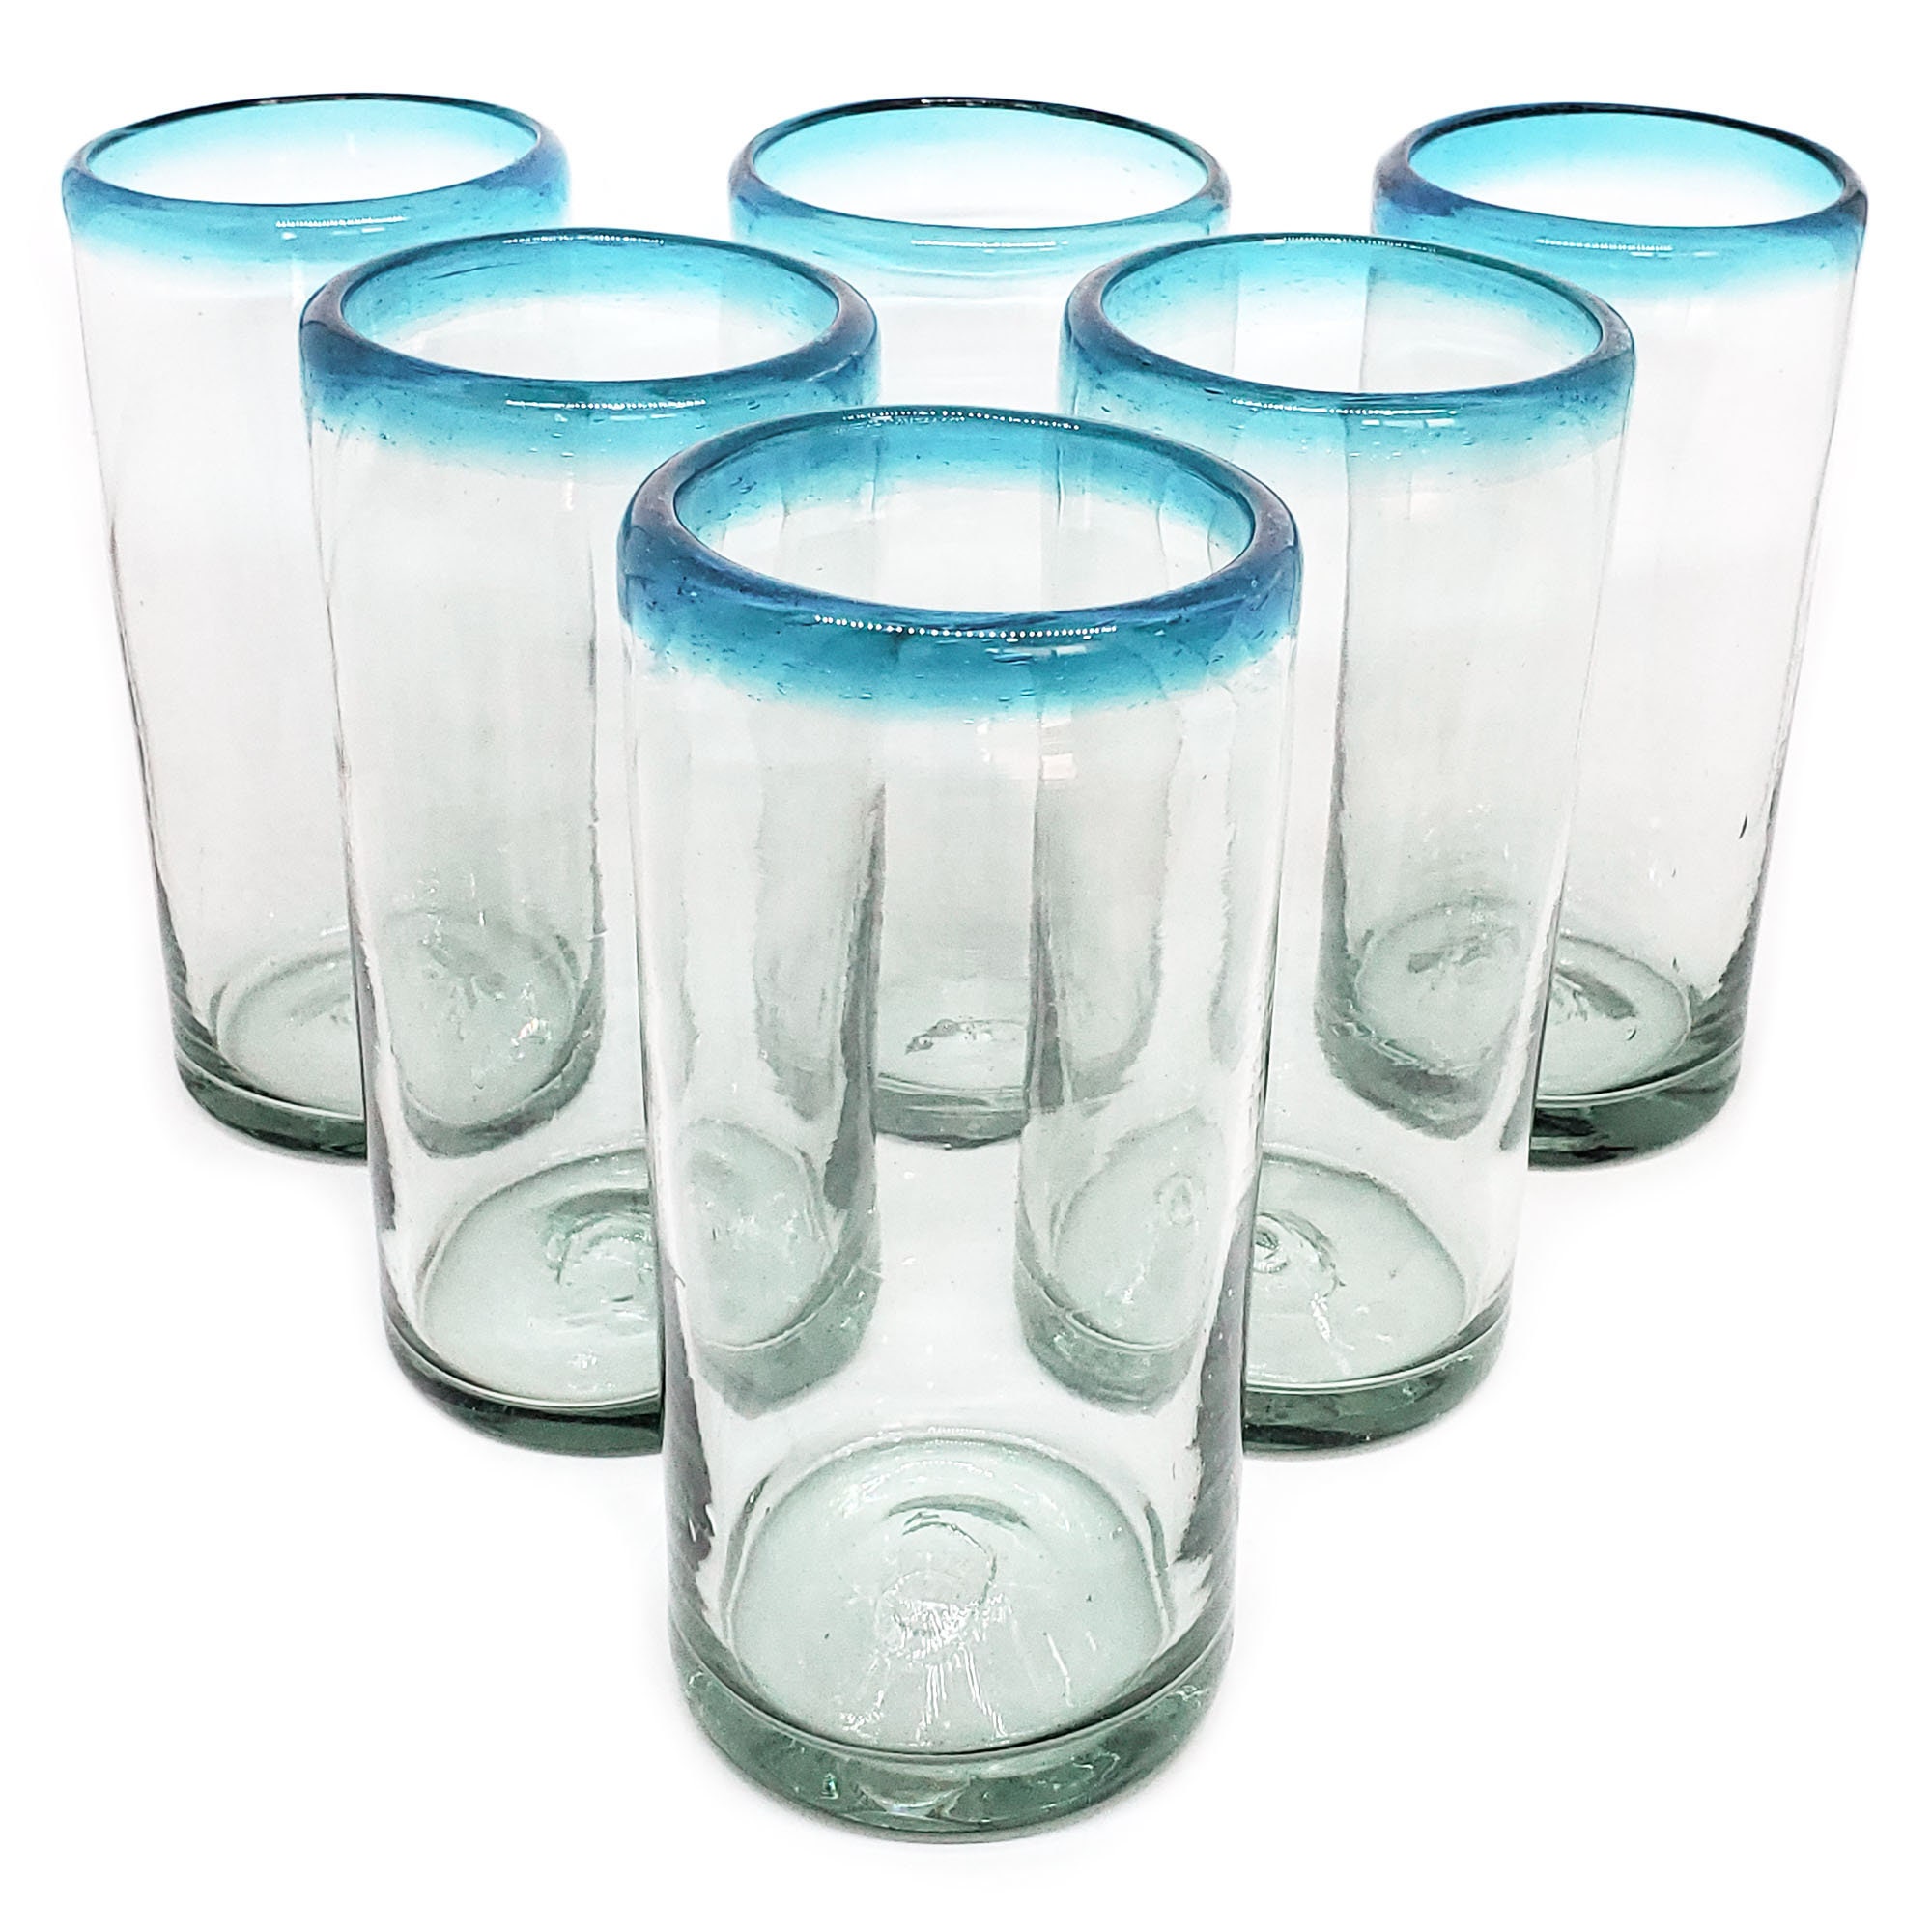 MexHandcraft Aqua Blue Rim 120 oz Pitcher and 6 Drinking Glasses  set, Recycled Glass, Lead-free, Toxin-Free (Pitcher & Glasses): Drinkware  Sets: Mixed Drinkware Sets